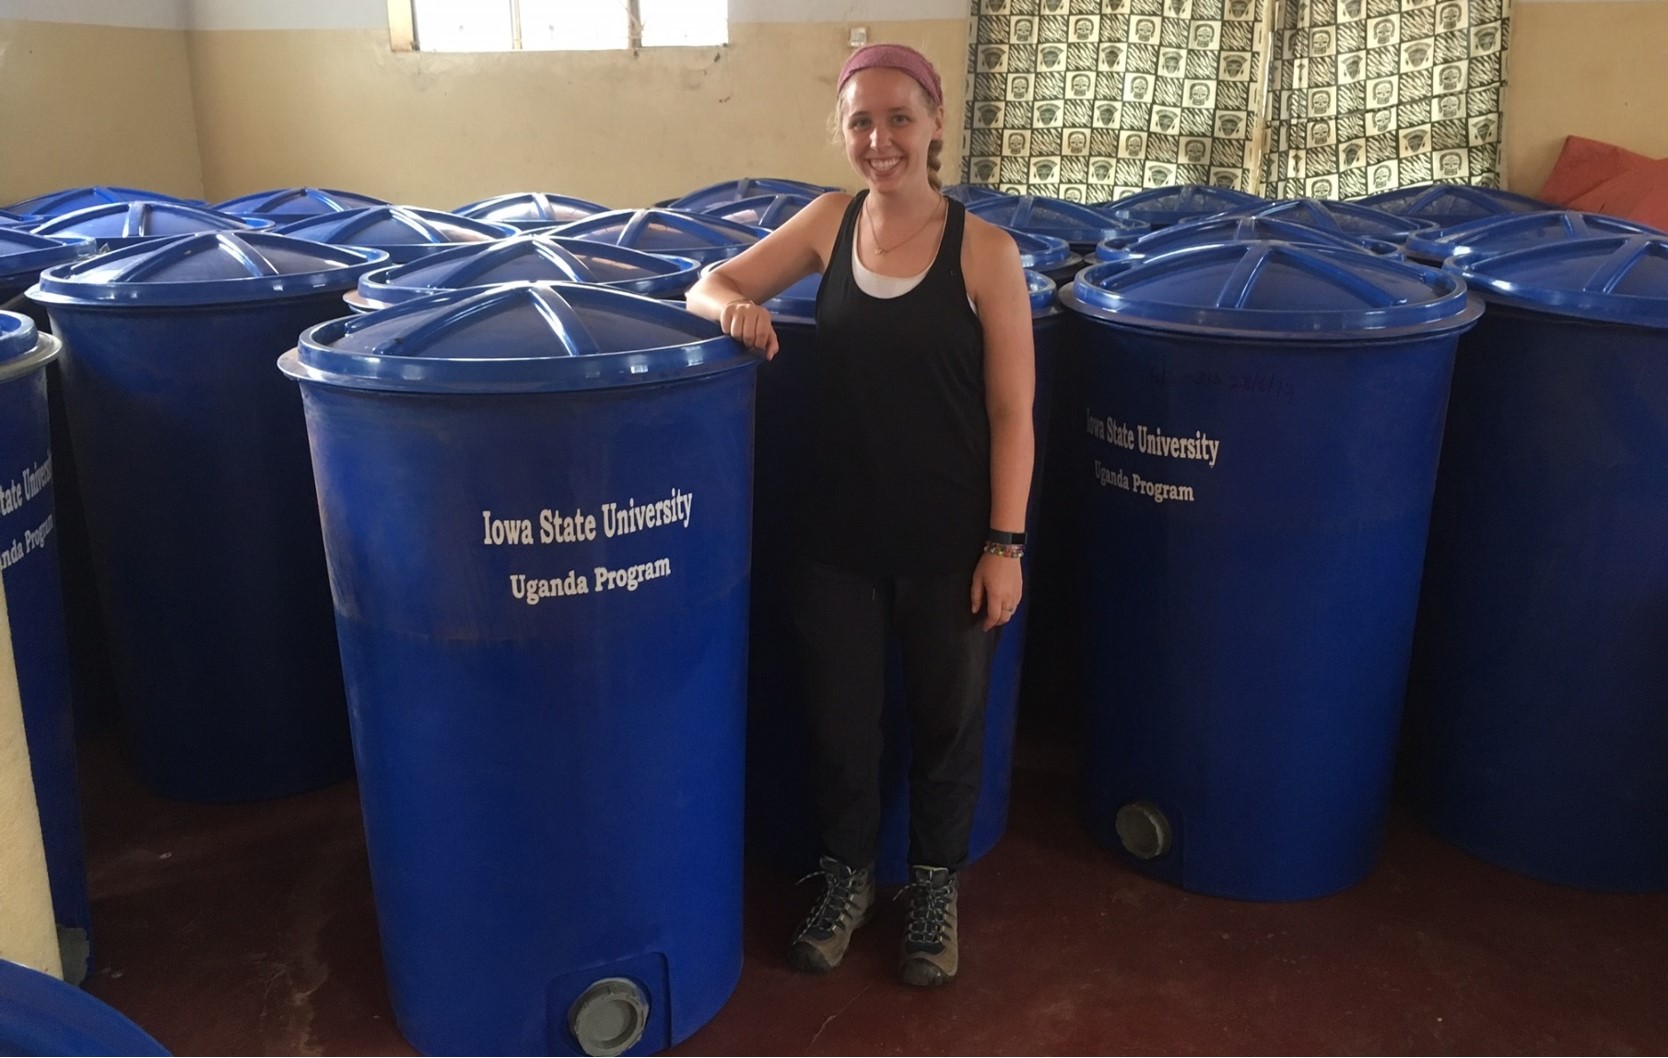 Hermetic silos in Uganda with ISU student in foreground